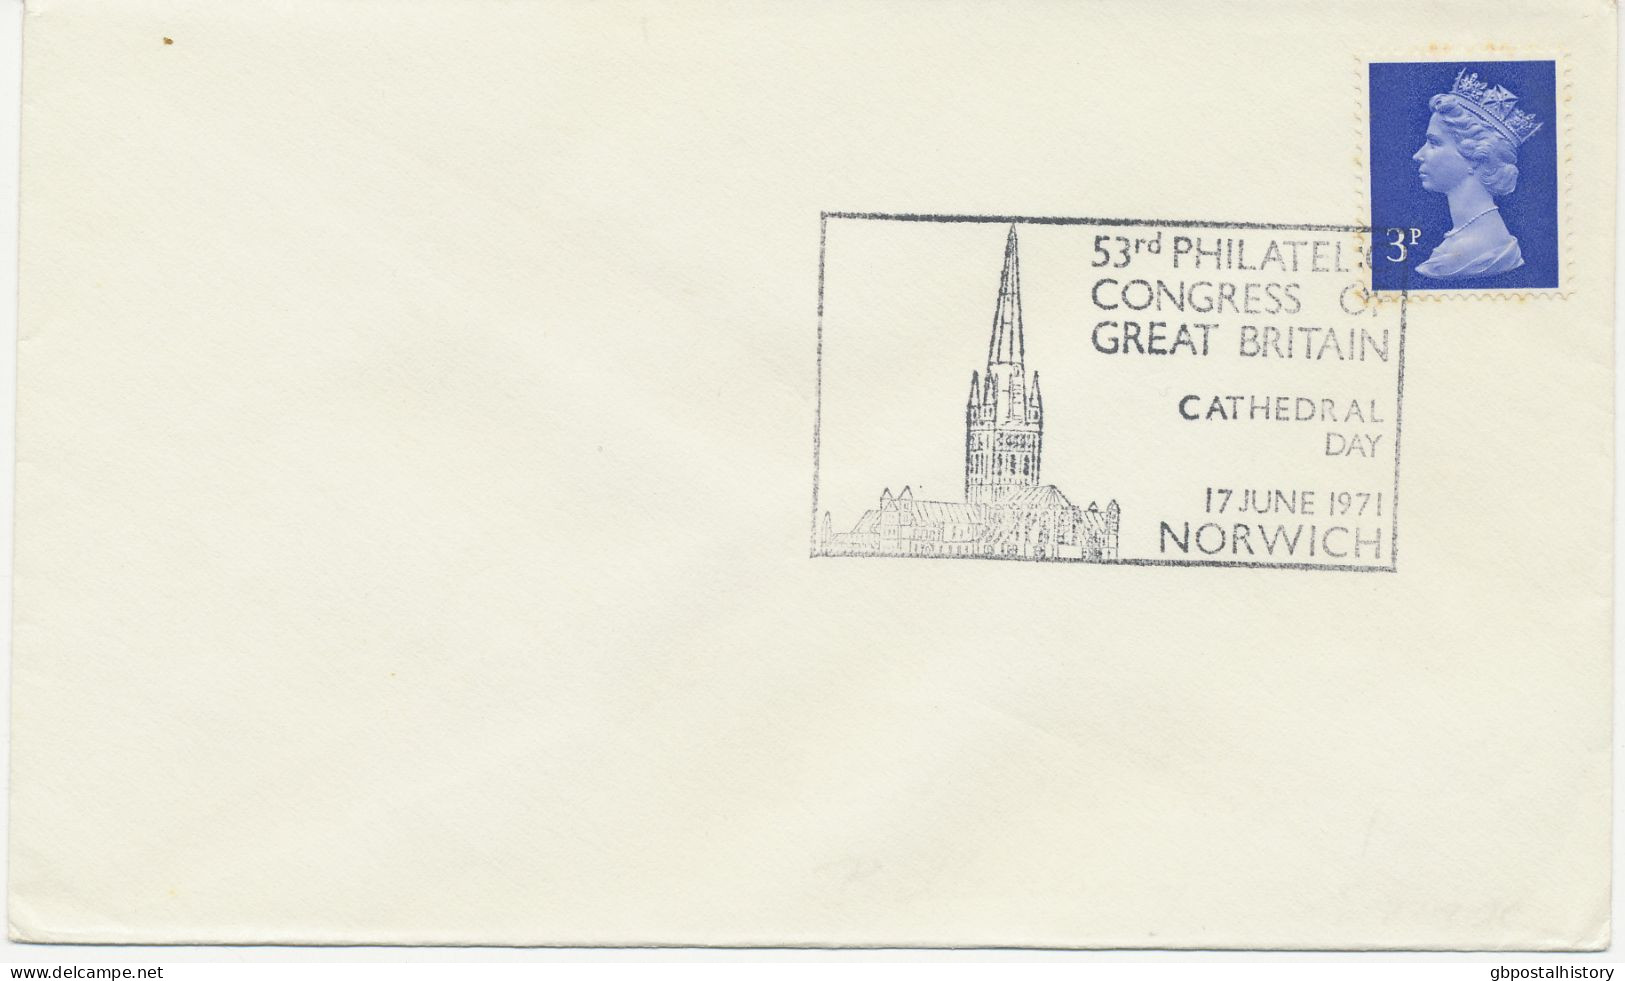 GB SPECIAL EVENT POSTMARKS 1971 53RD PHILATELIC CONGRESS OF GREAT BRITAIN NORWICH - CATHEDRAL DAY - Briefe U. Dokumente